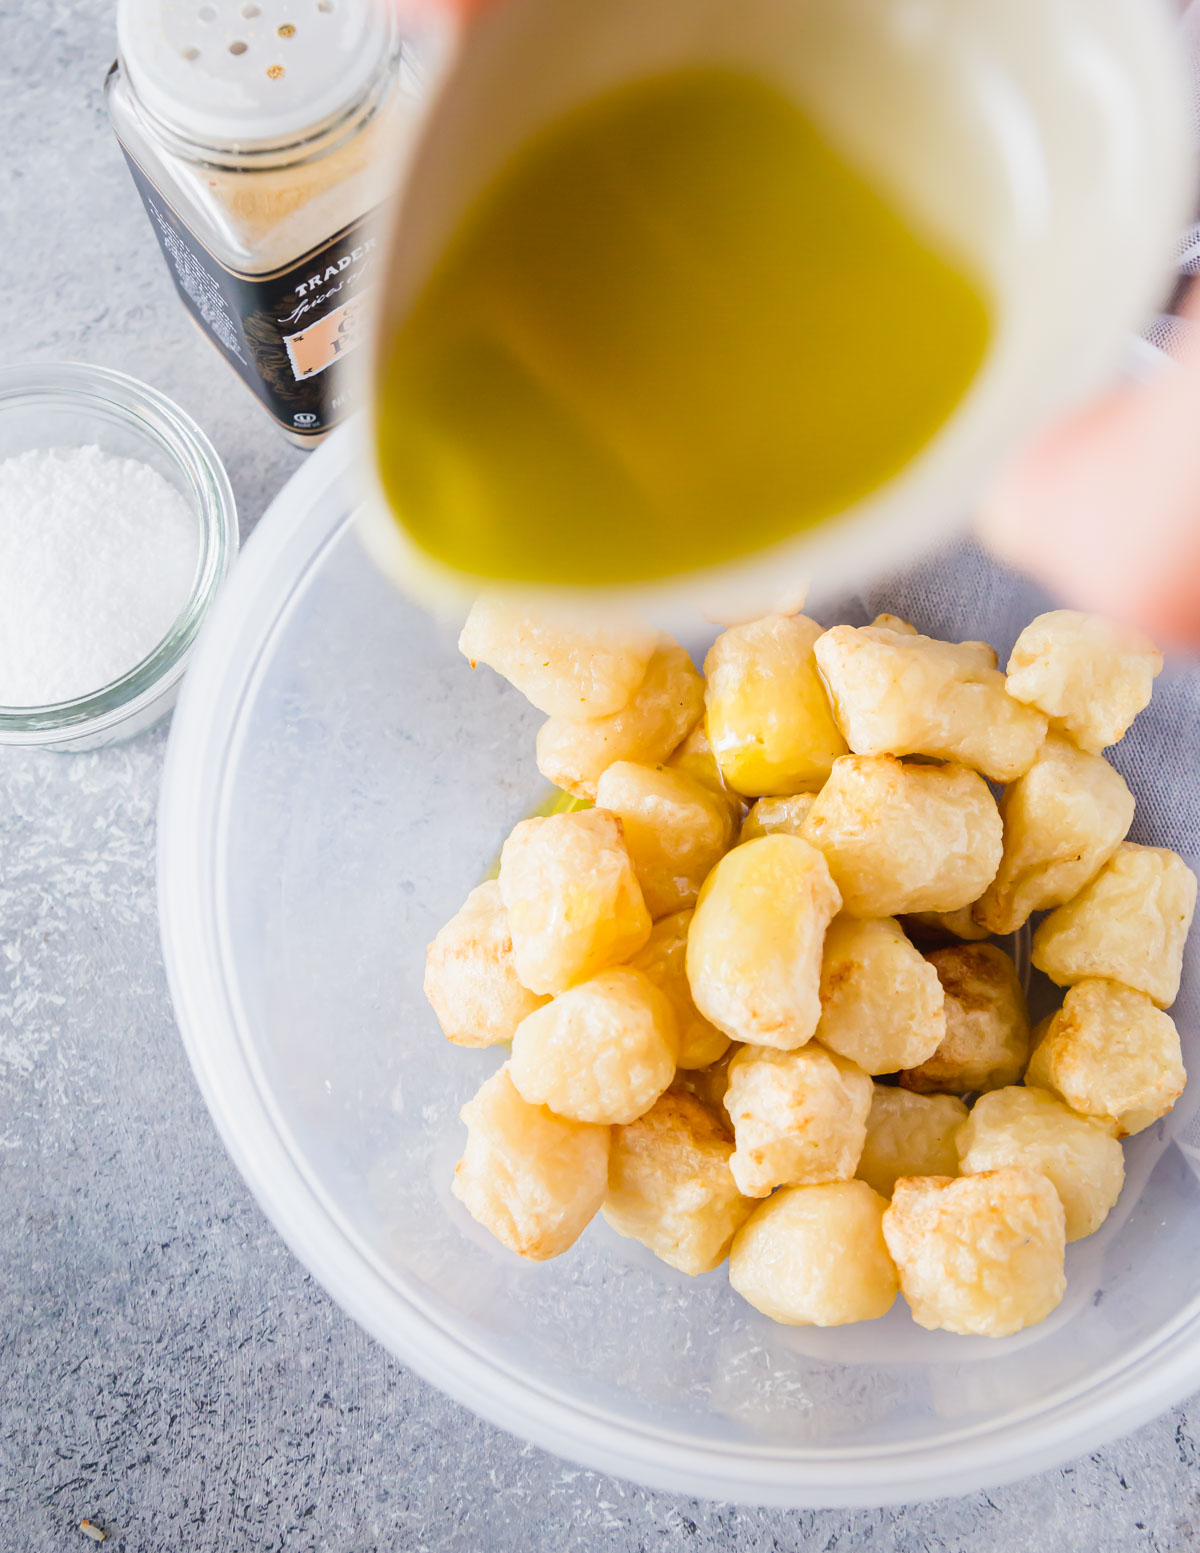 Once air-fried, cauliflower gnocchi can be enjoyed as a main dish simply by sautéing with olive oil, garlic powder, and salt.